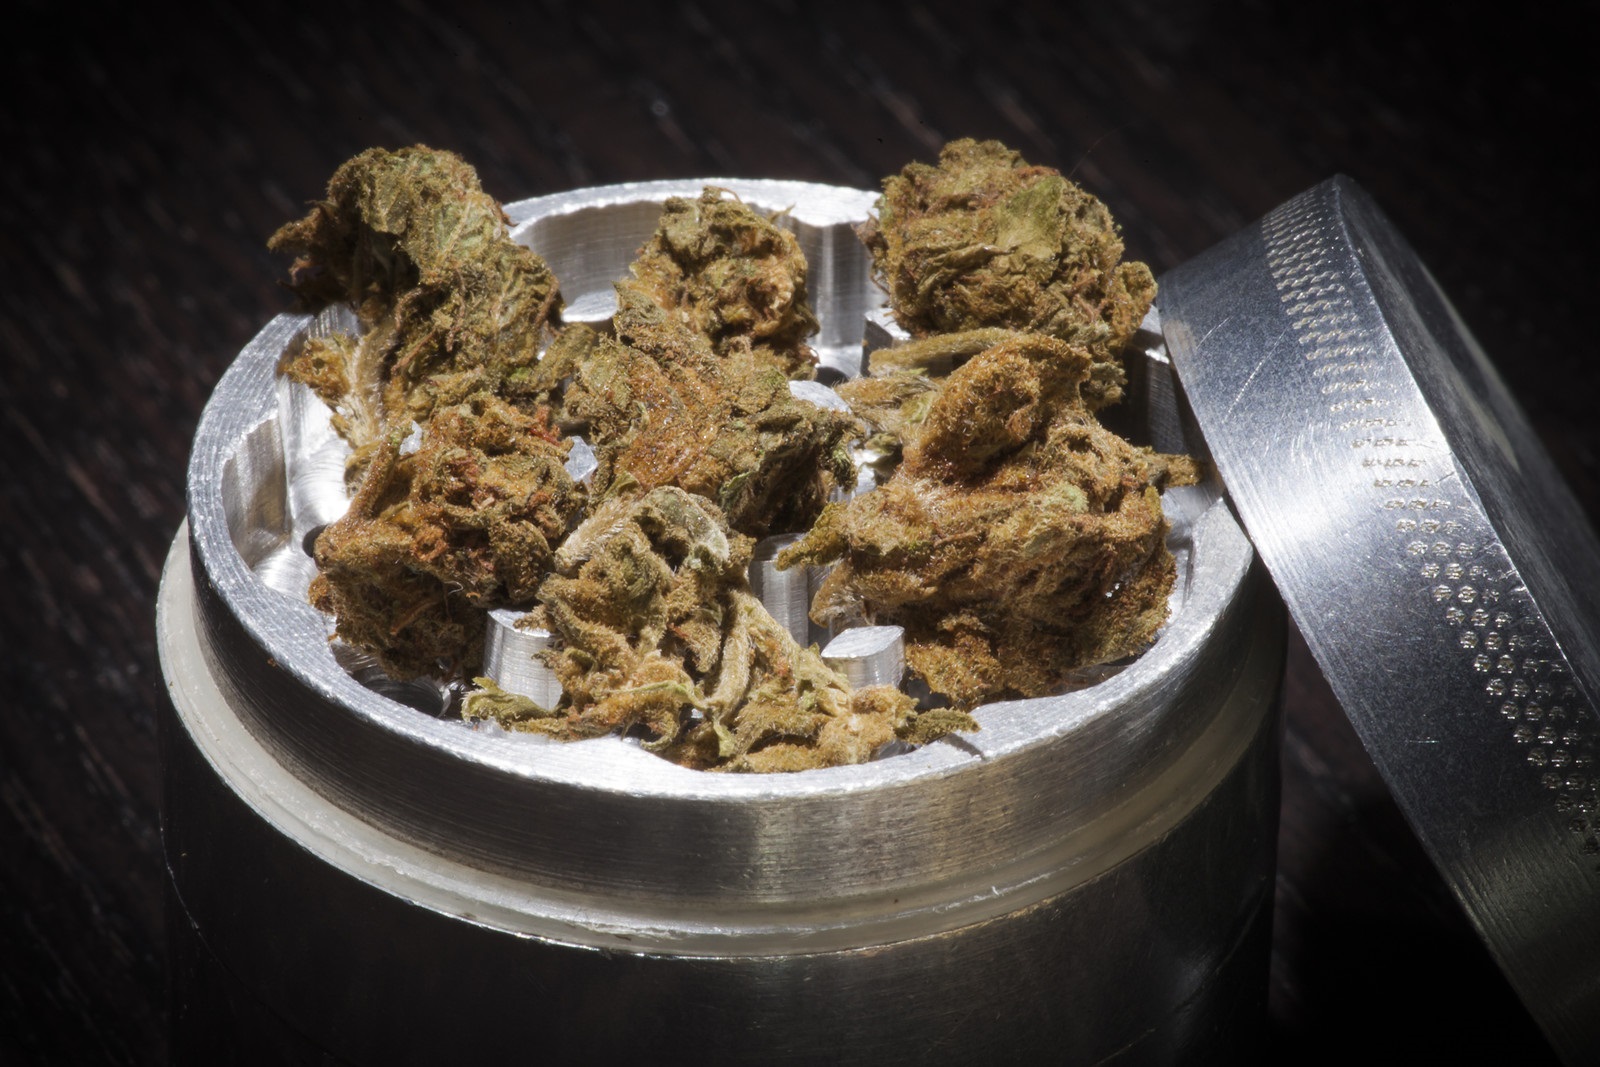 Cannabis Grinder: Top Ways To Roll A Joint Without Need For One